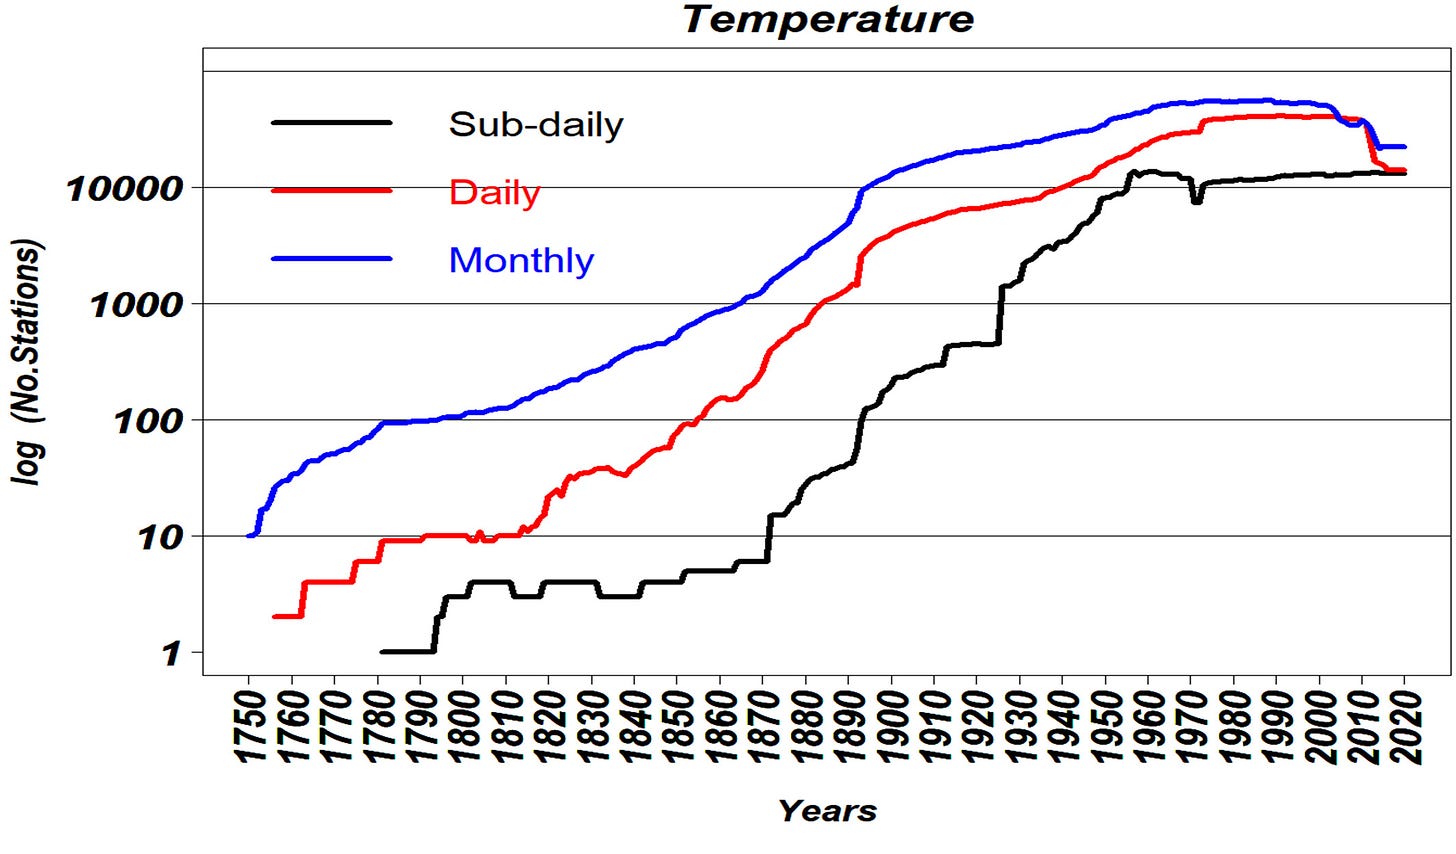 A chart of the number of stations recording temperature over time. The vertical scale is logarithmic, and we can see that over the period 1750-2020, there has been exponential growth in the number of stations (though in recent years that tapered off). This is true for sub-daily, daily, and monthly measurements.